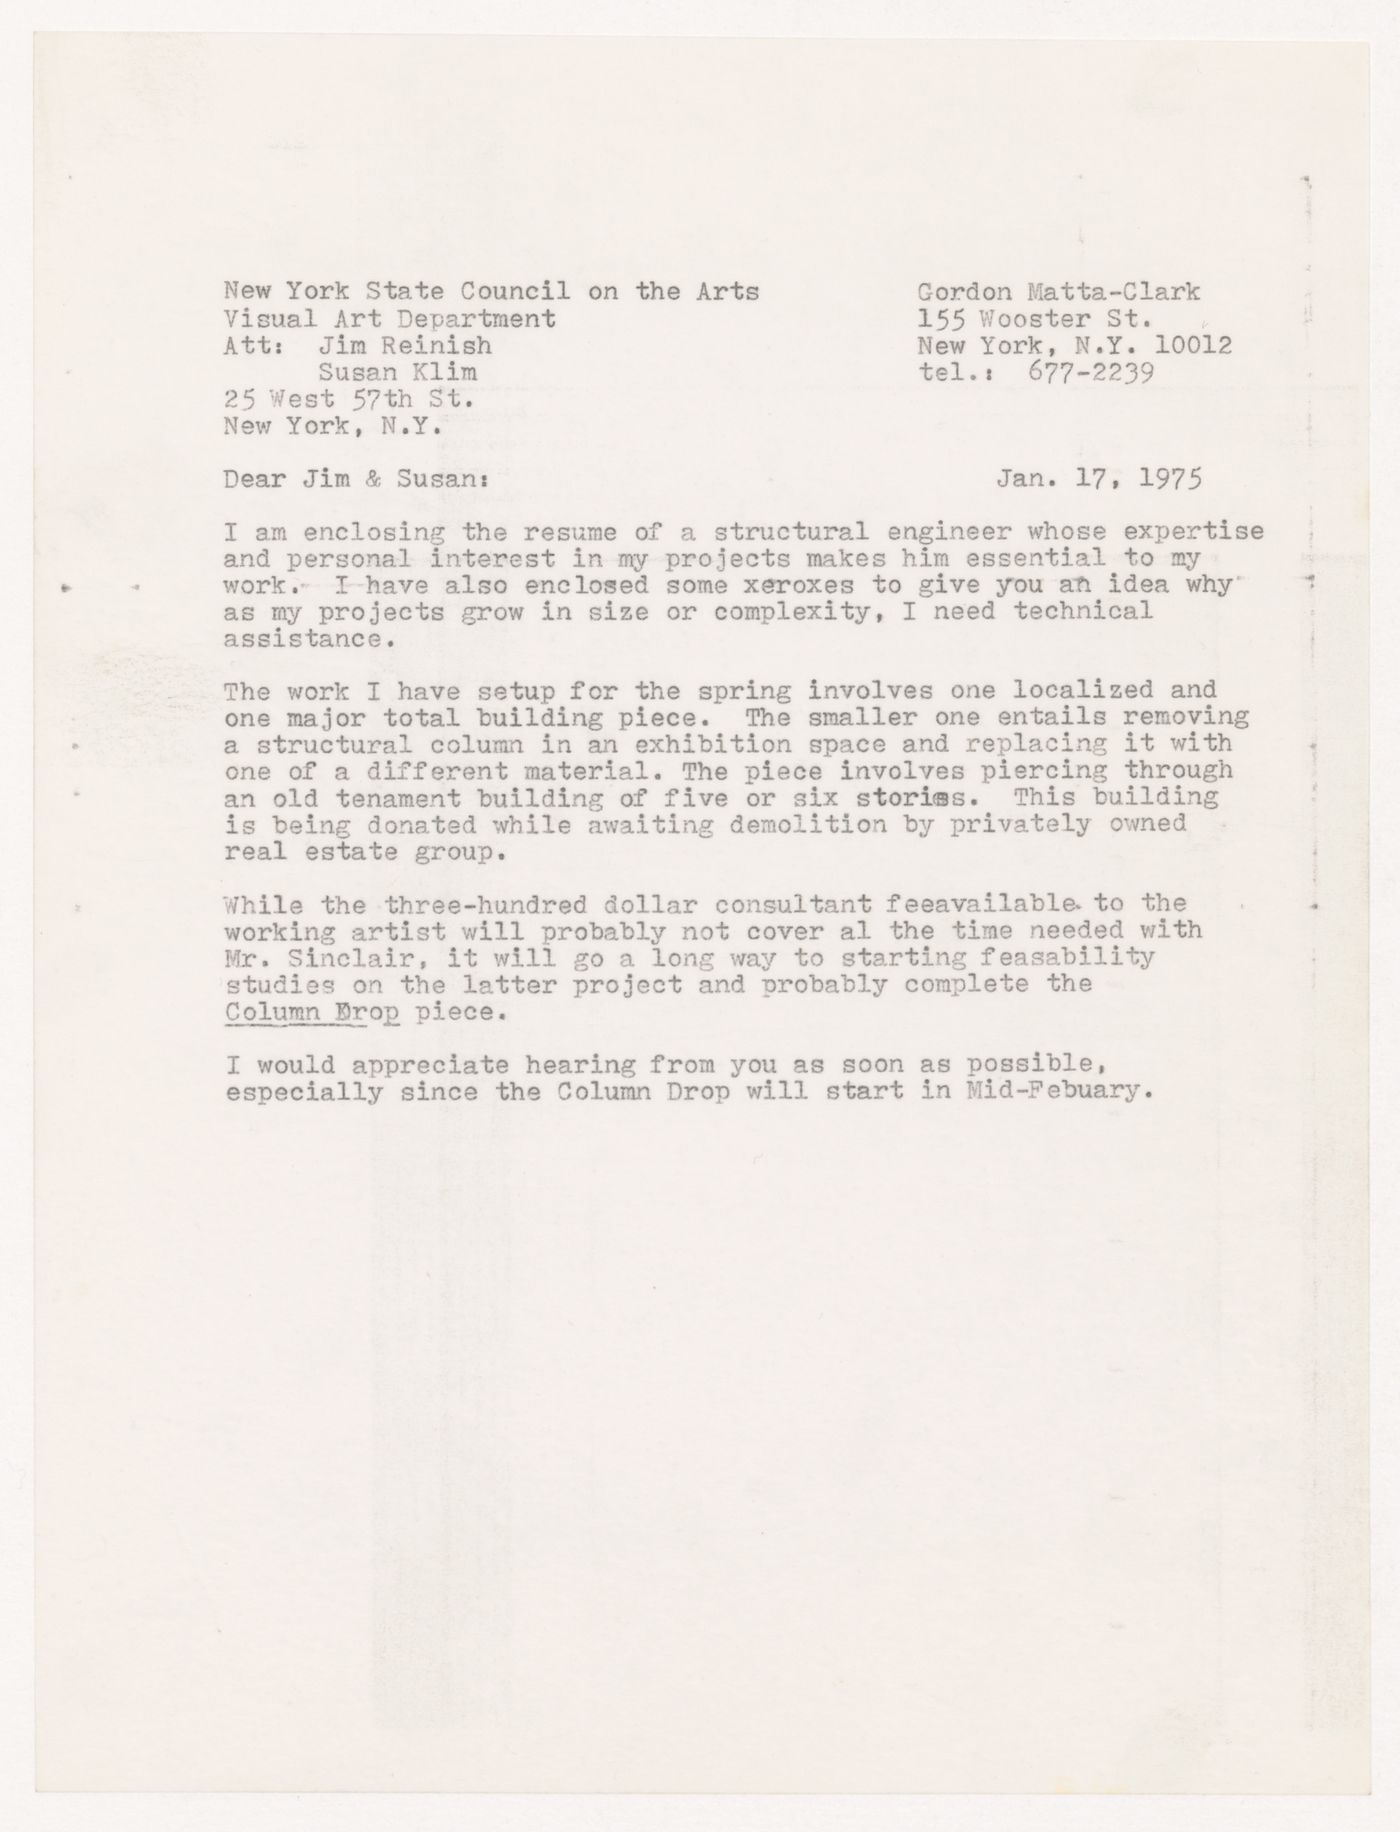 Letter from Gordon Matta-Clark to New York State Council on the Arts, Visual Arts Department, with attention to Jim Reinish and Susan Kilm